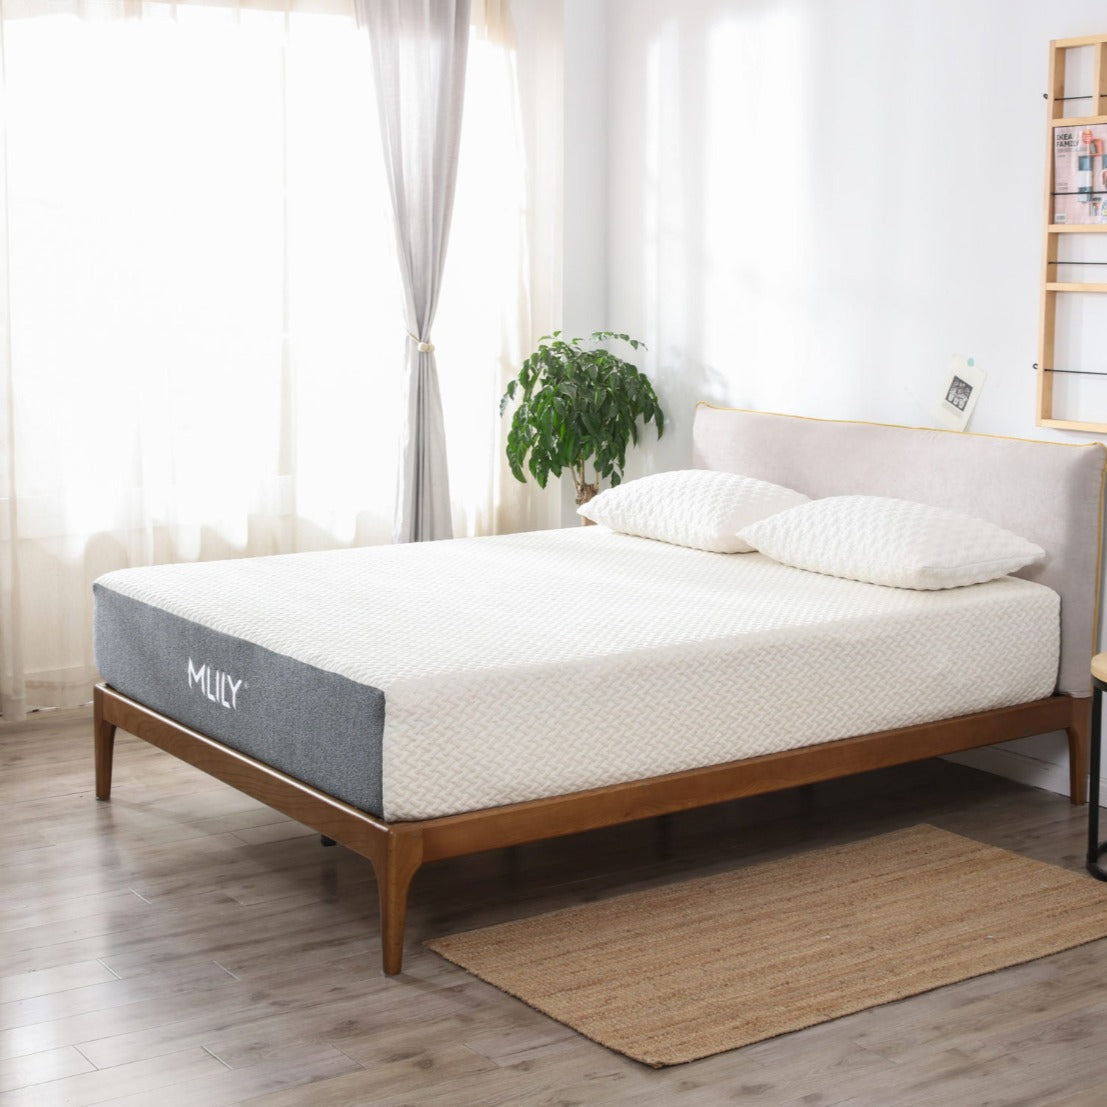 MLILY Fusion Orthopedic Hybrid Mattress - Luxurious Beds and Linens